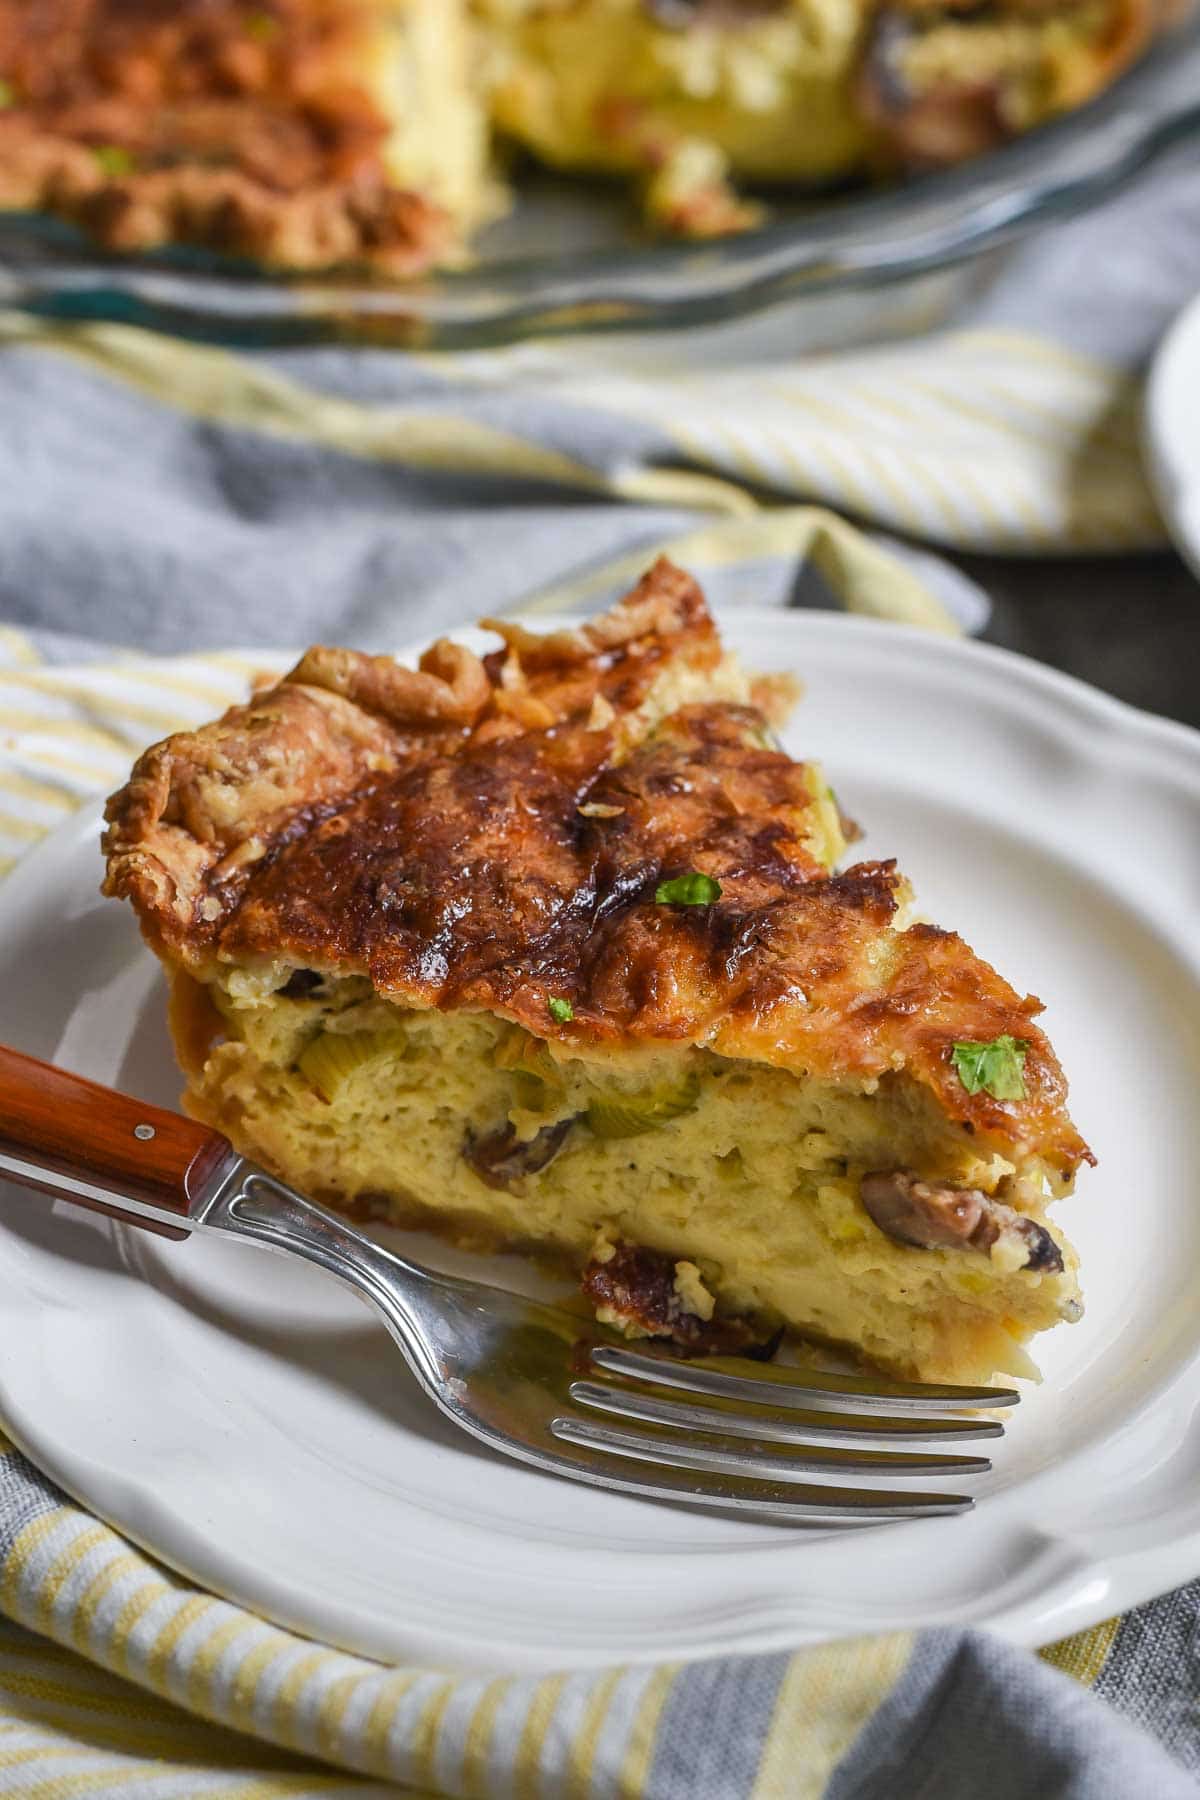 This Mushroom and Leek Quiche is rich and filling, perfect for Easter or any spring brunch!